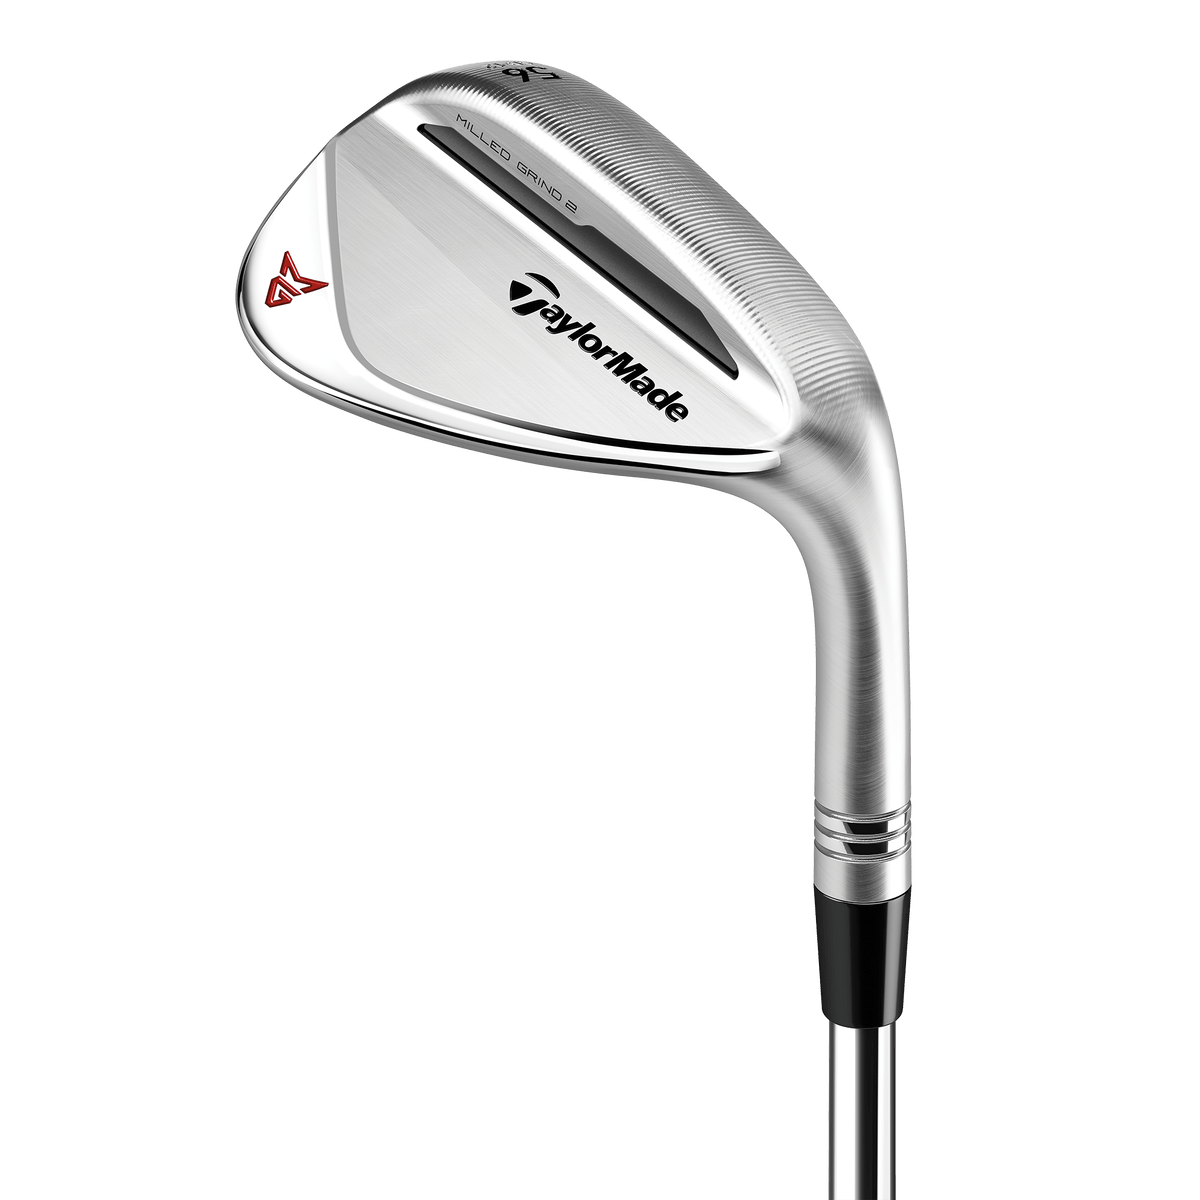 TaylorMade Milled Grind 2 Chrome Wedge